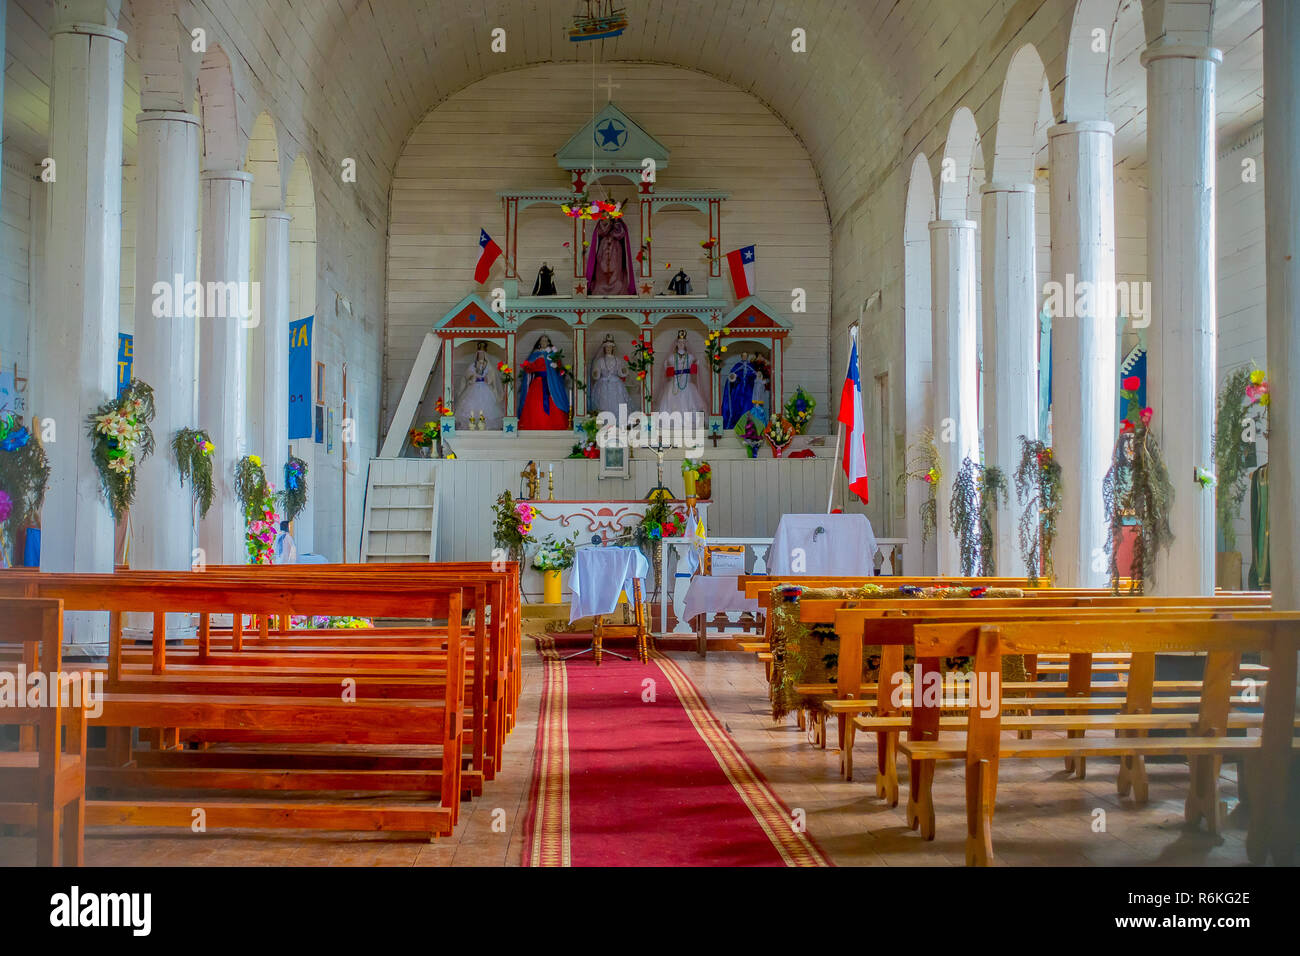 CHILOE, CHILE - SEPTEMBER, 27, 2018: Inside view of Jes s of Nazareno church in Aldachildo on Lemuy Island, is one of the Churches of Chilo Archipelag Stock Photo